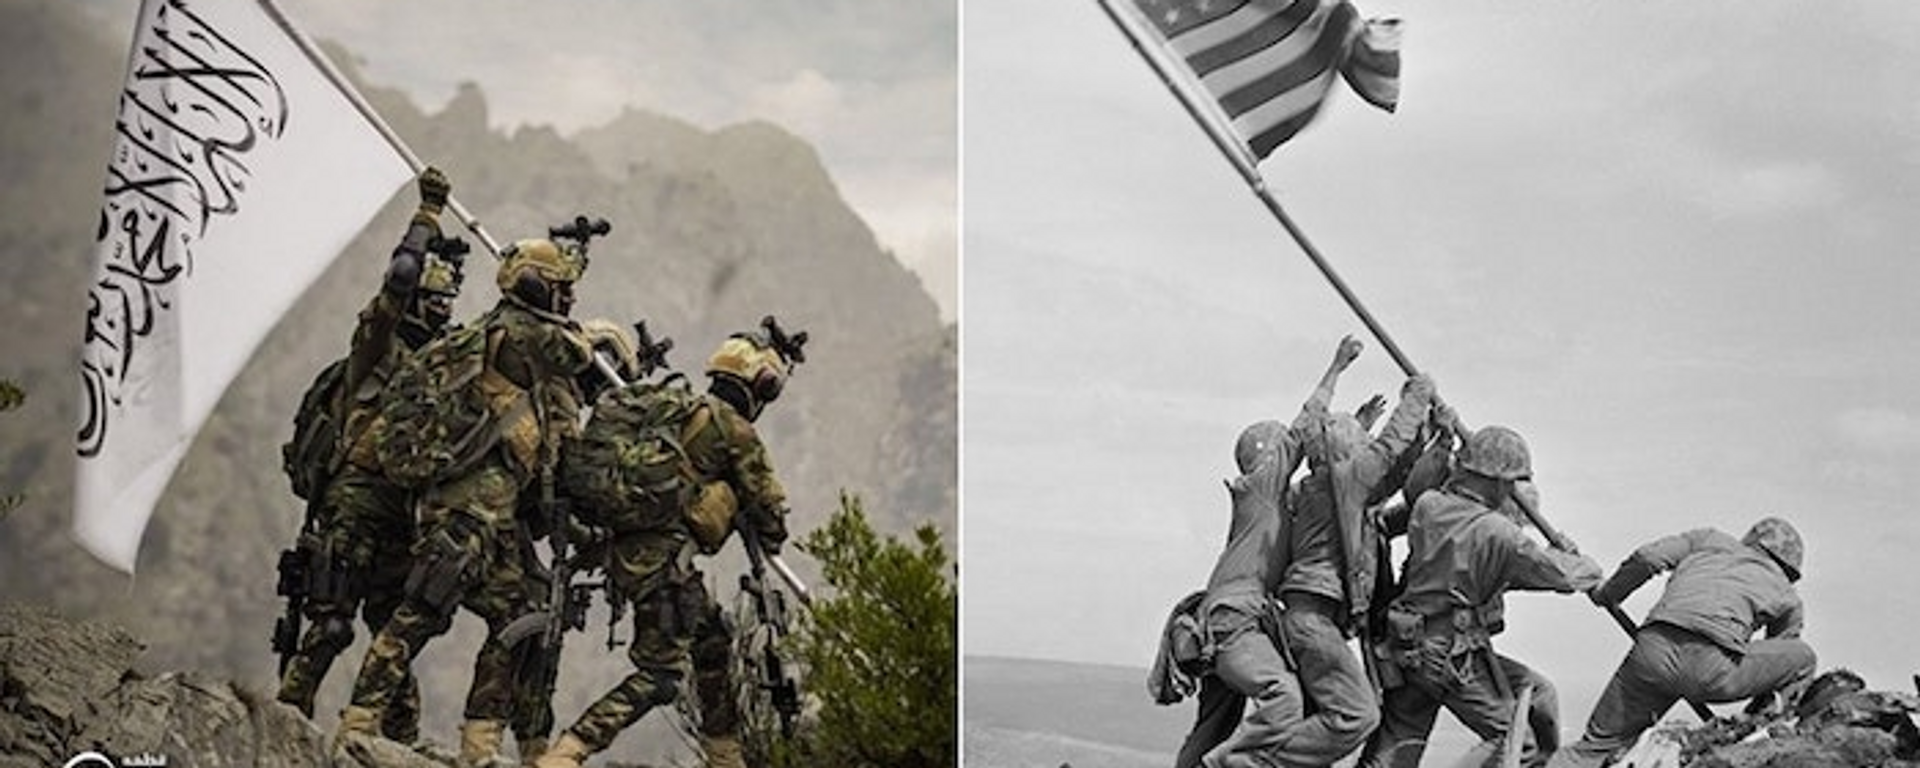 Taliban fighters stage photo to look like iconic WWII photo of US troops raising flag over Iwo Jima. - Sputnik International, 1920, 21.08.2021